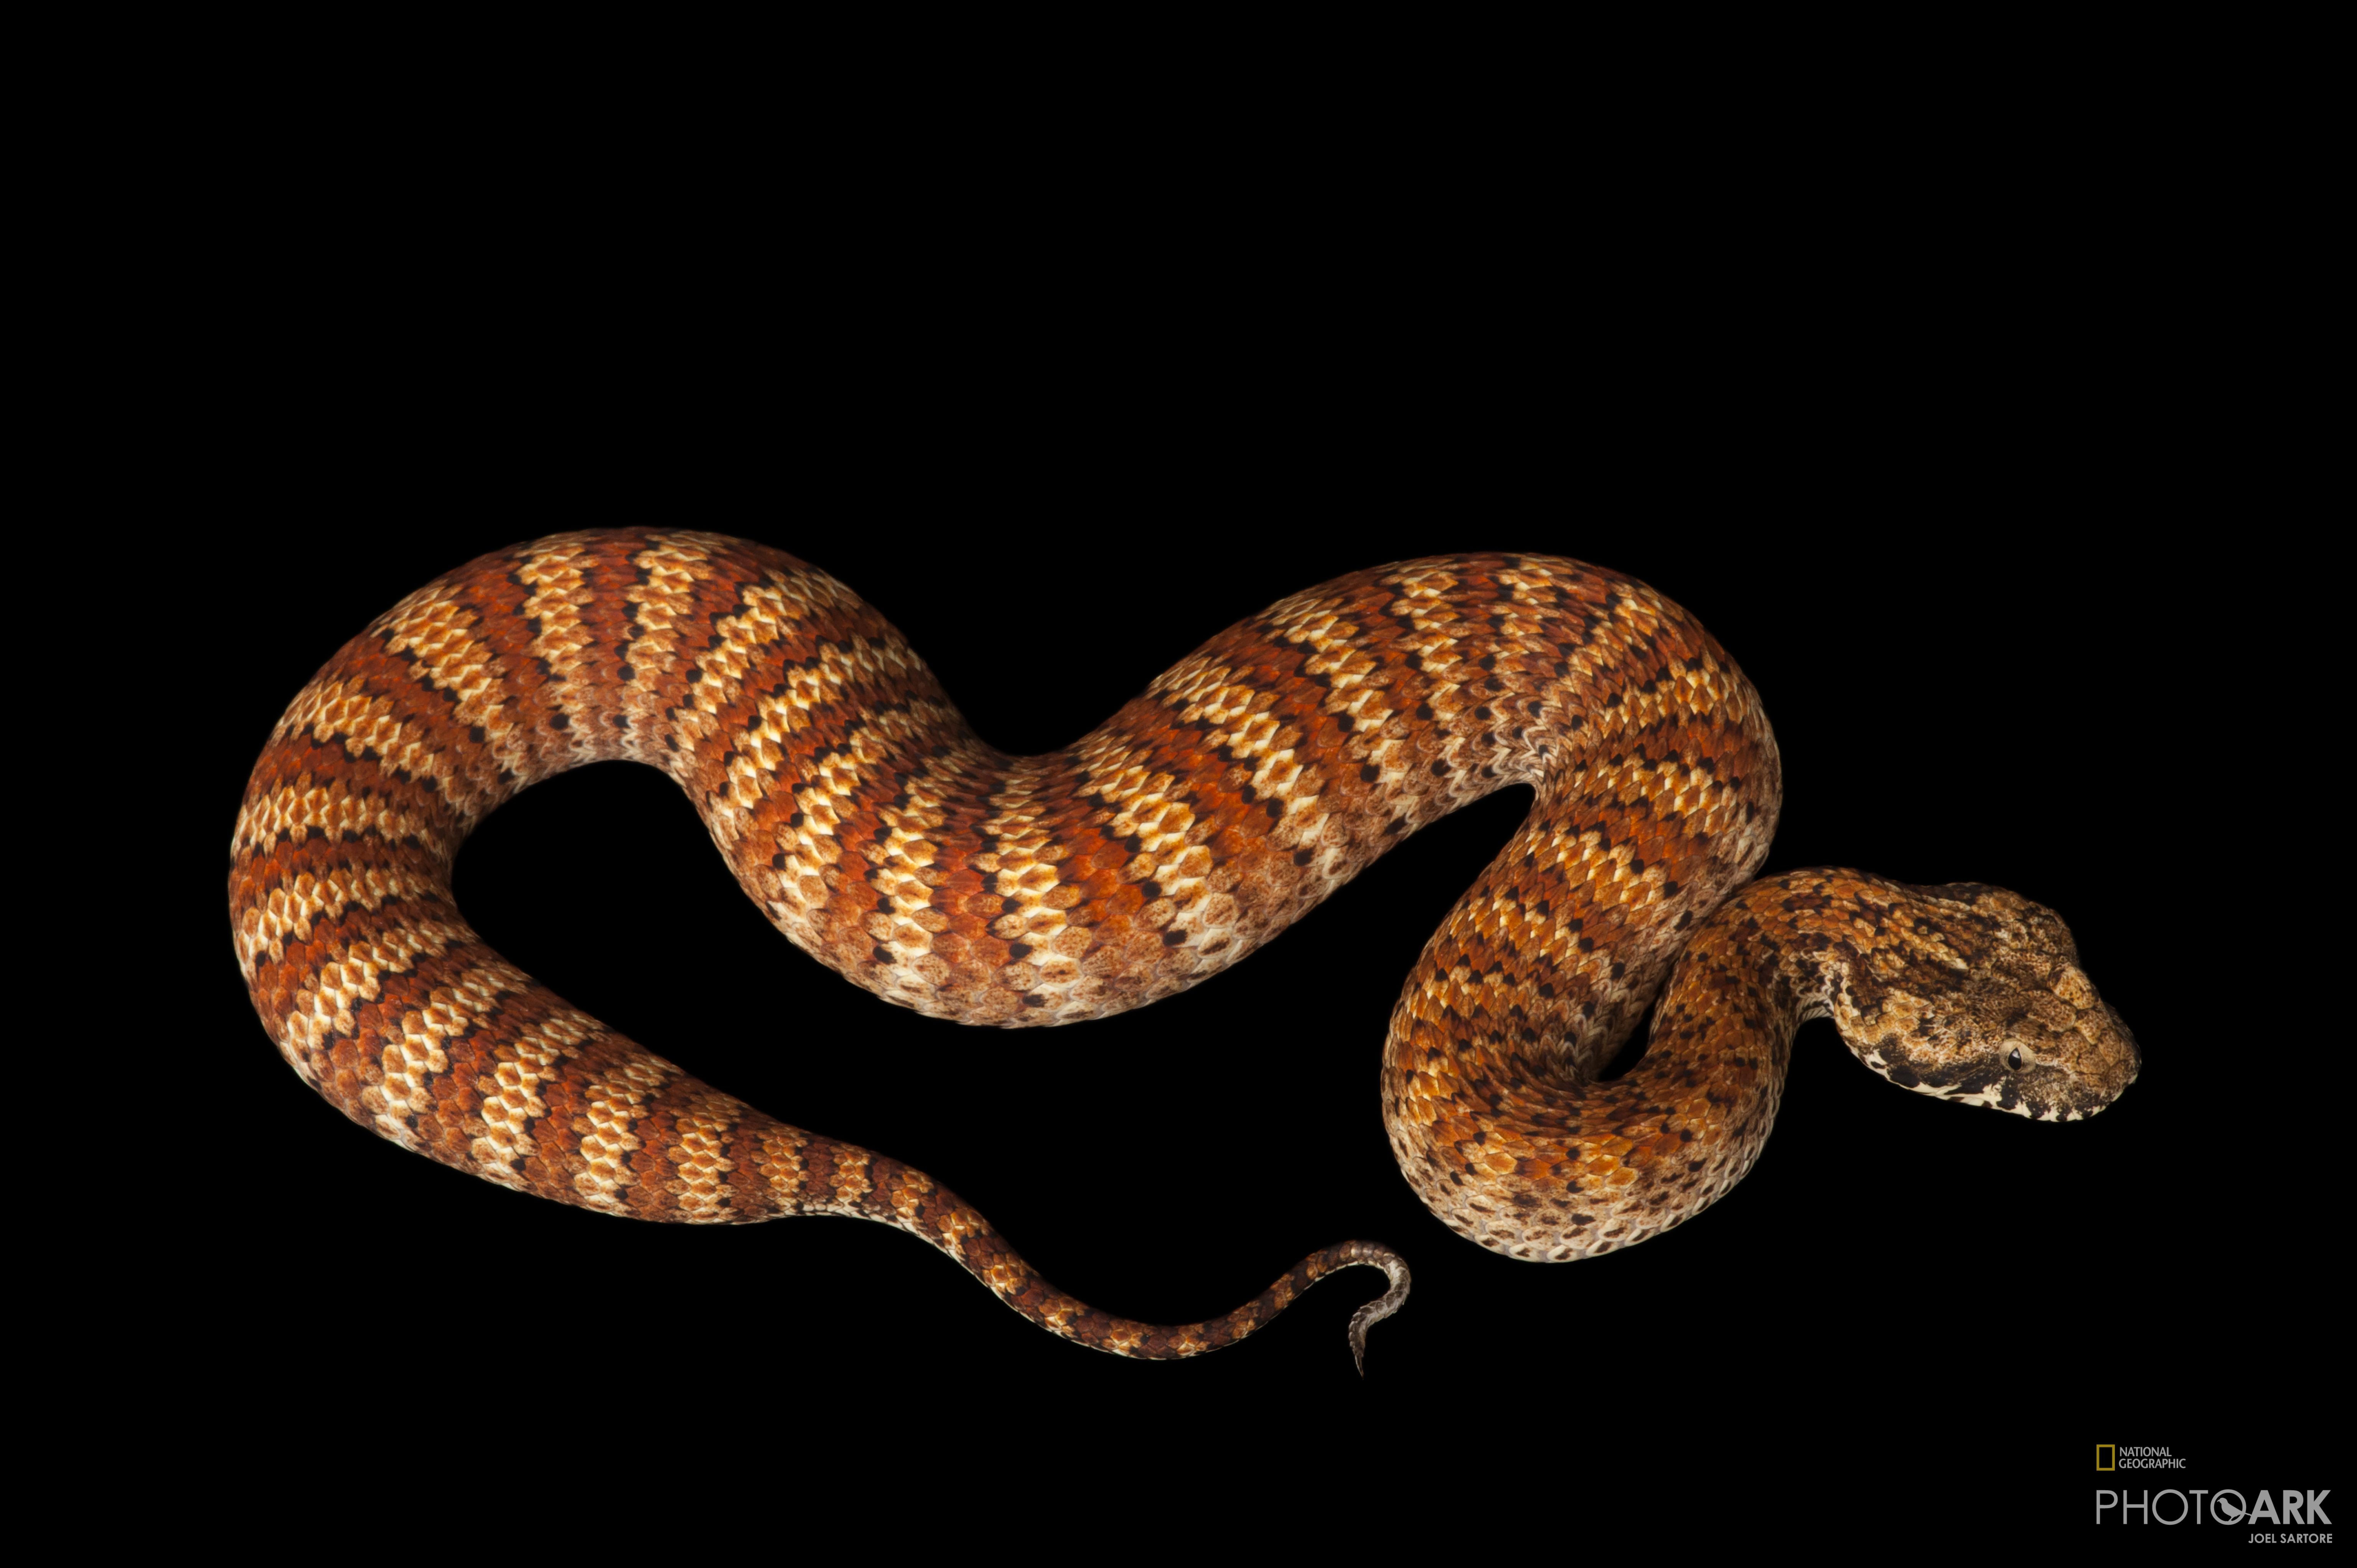 Ark Home Common Death Adder | National Geographic